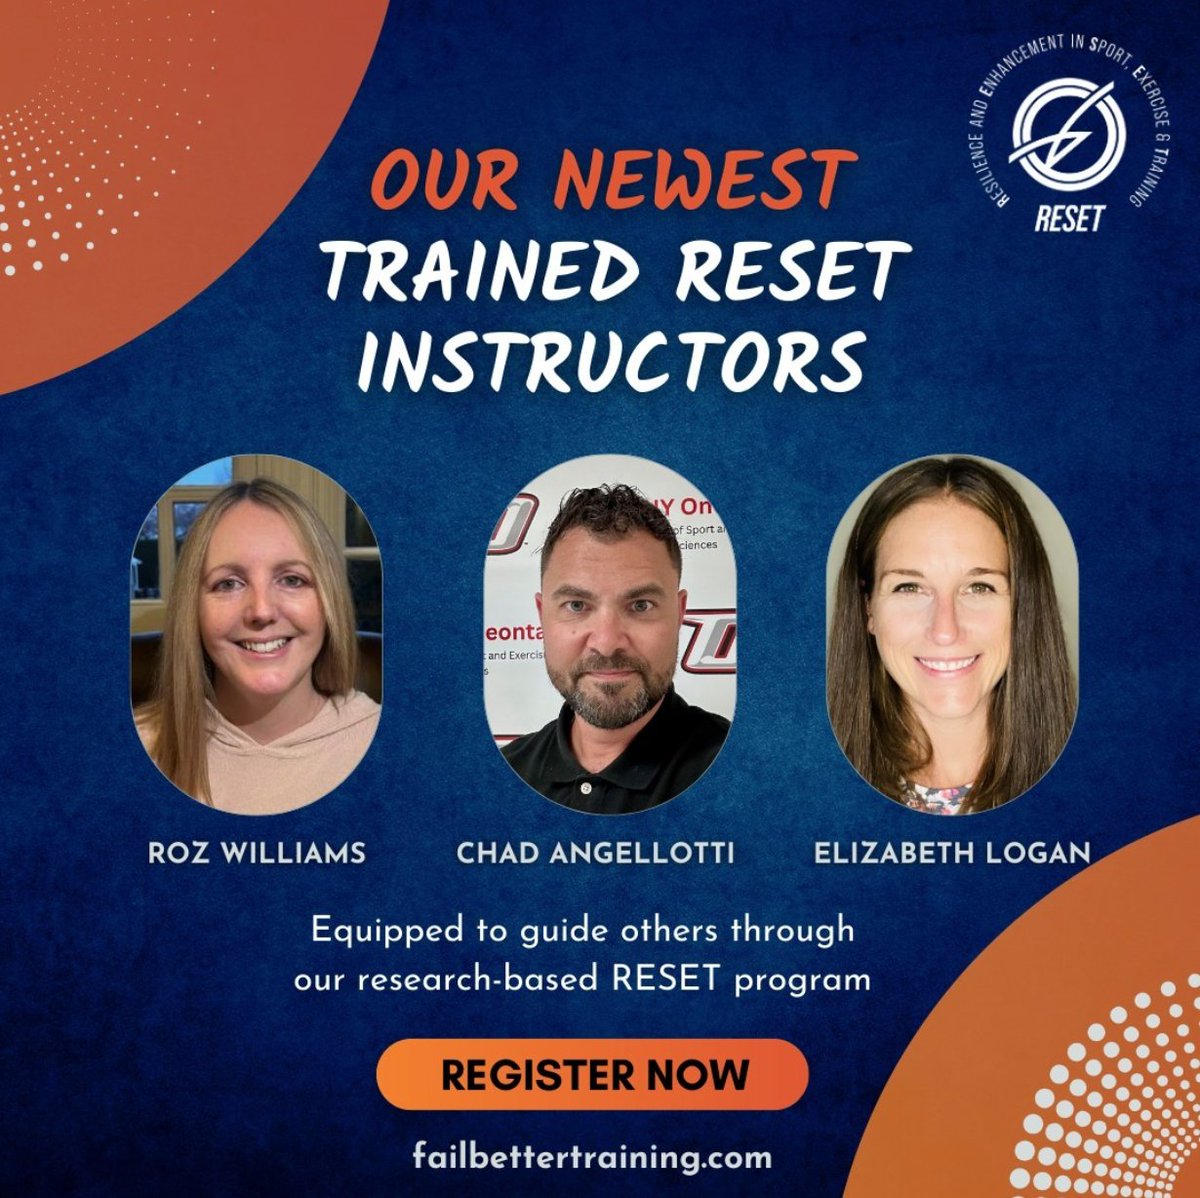 Interested in becoming a Trained RESET Instructor? We’re accepting applications for our summer cohort!

#FailBetterTraining #RESETInstructors #RESET #Resilience #MentalSkills #Training #ProfessionalDevelopment #TrainTheTrainer #PerformanceCoaching #SportsPerformance #Motivation